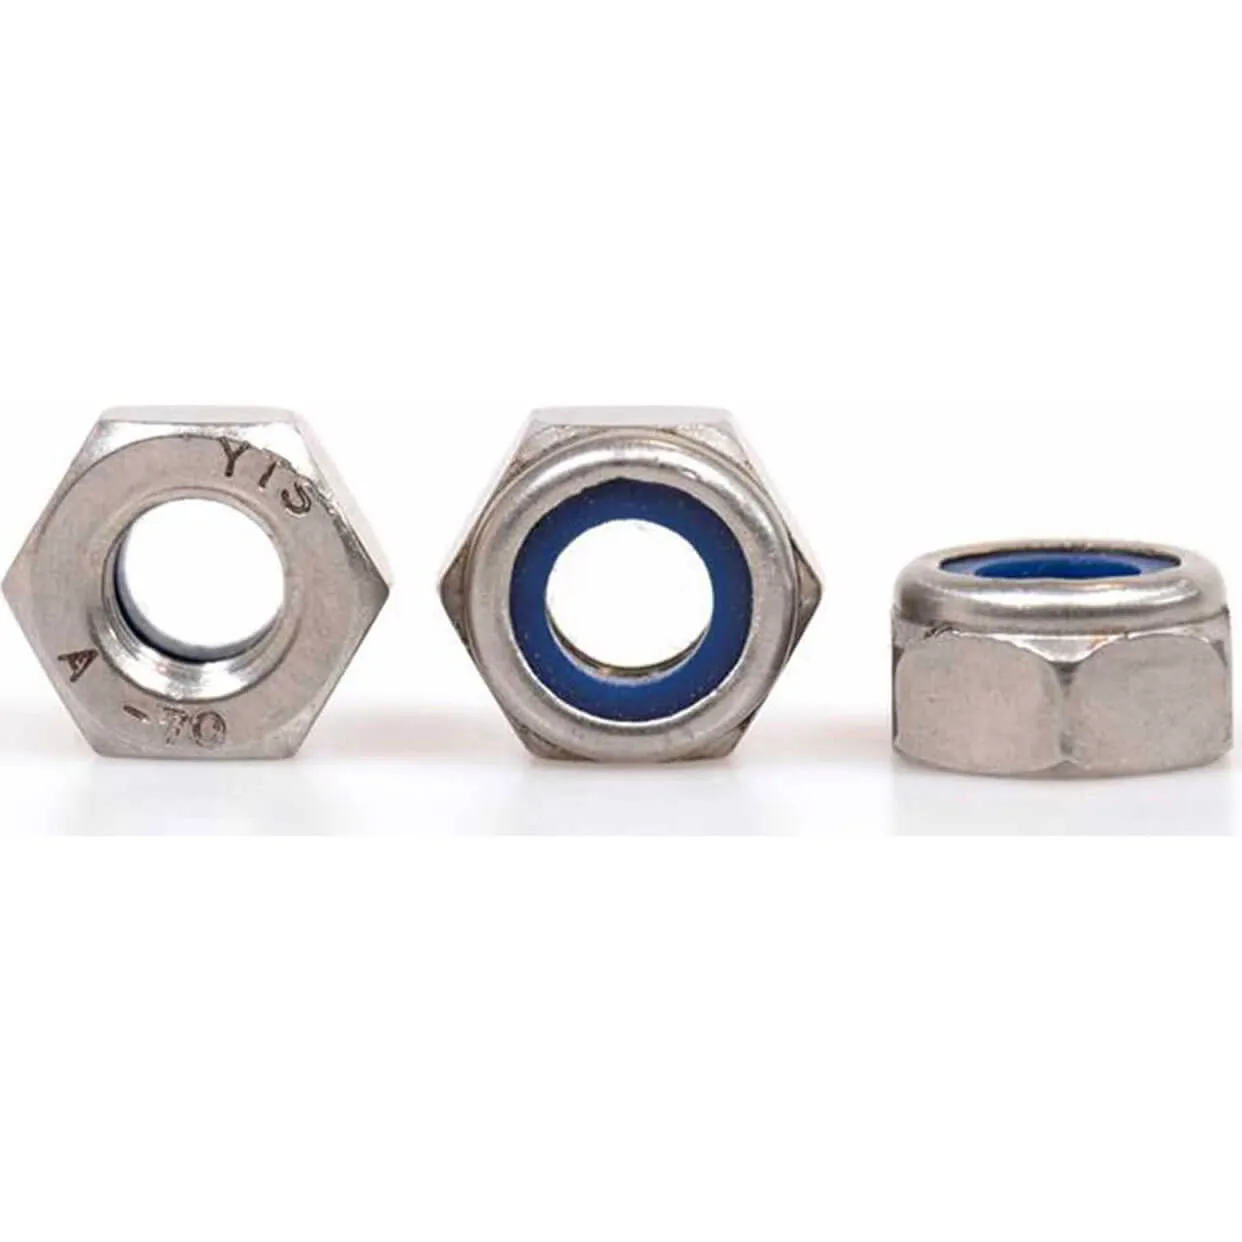 Sirius A4 316 Stainless Steel Nyloc Nuts - M5